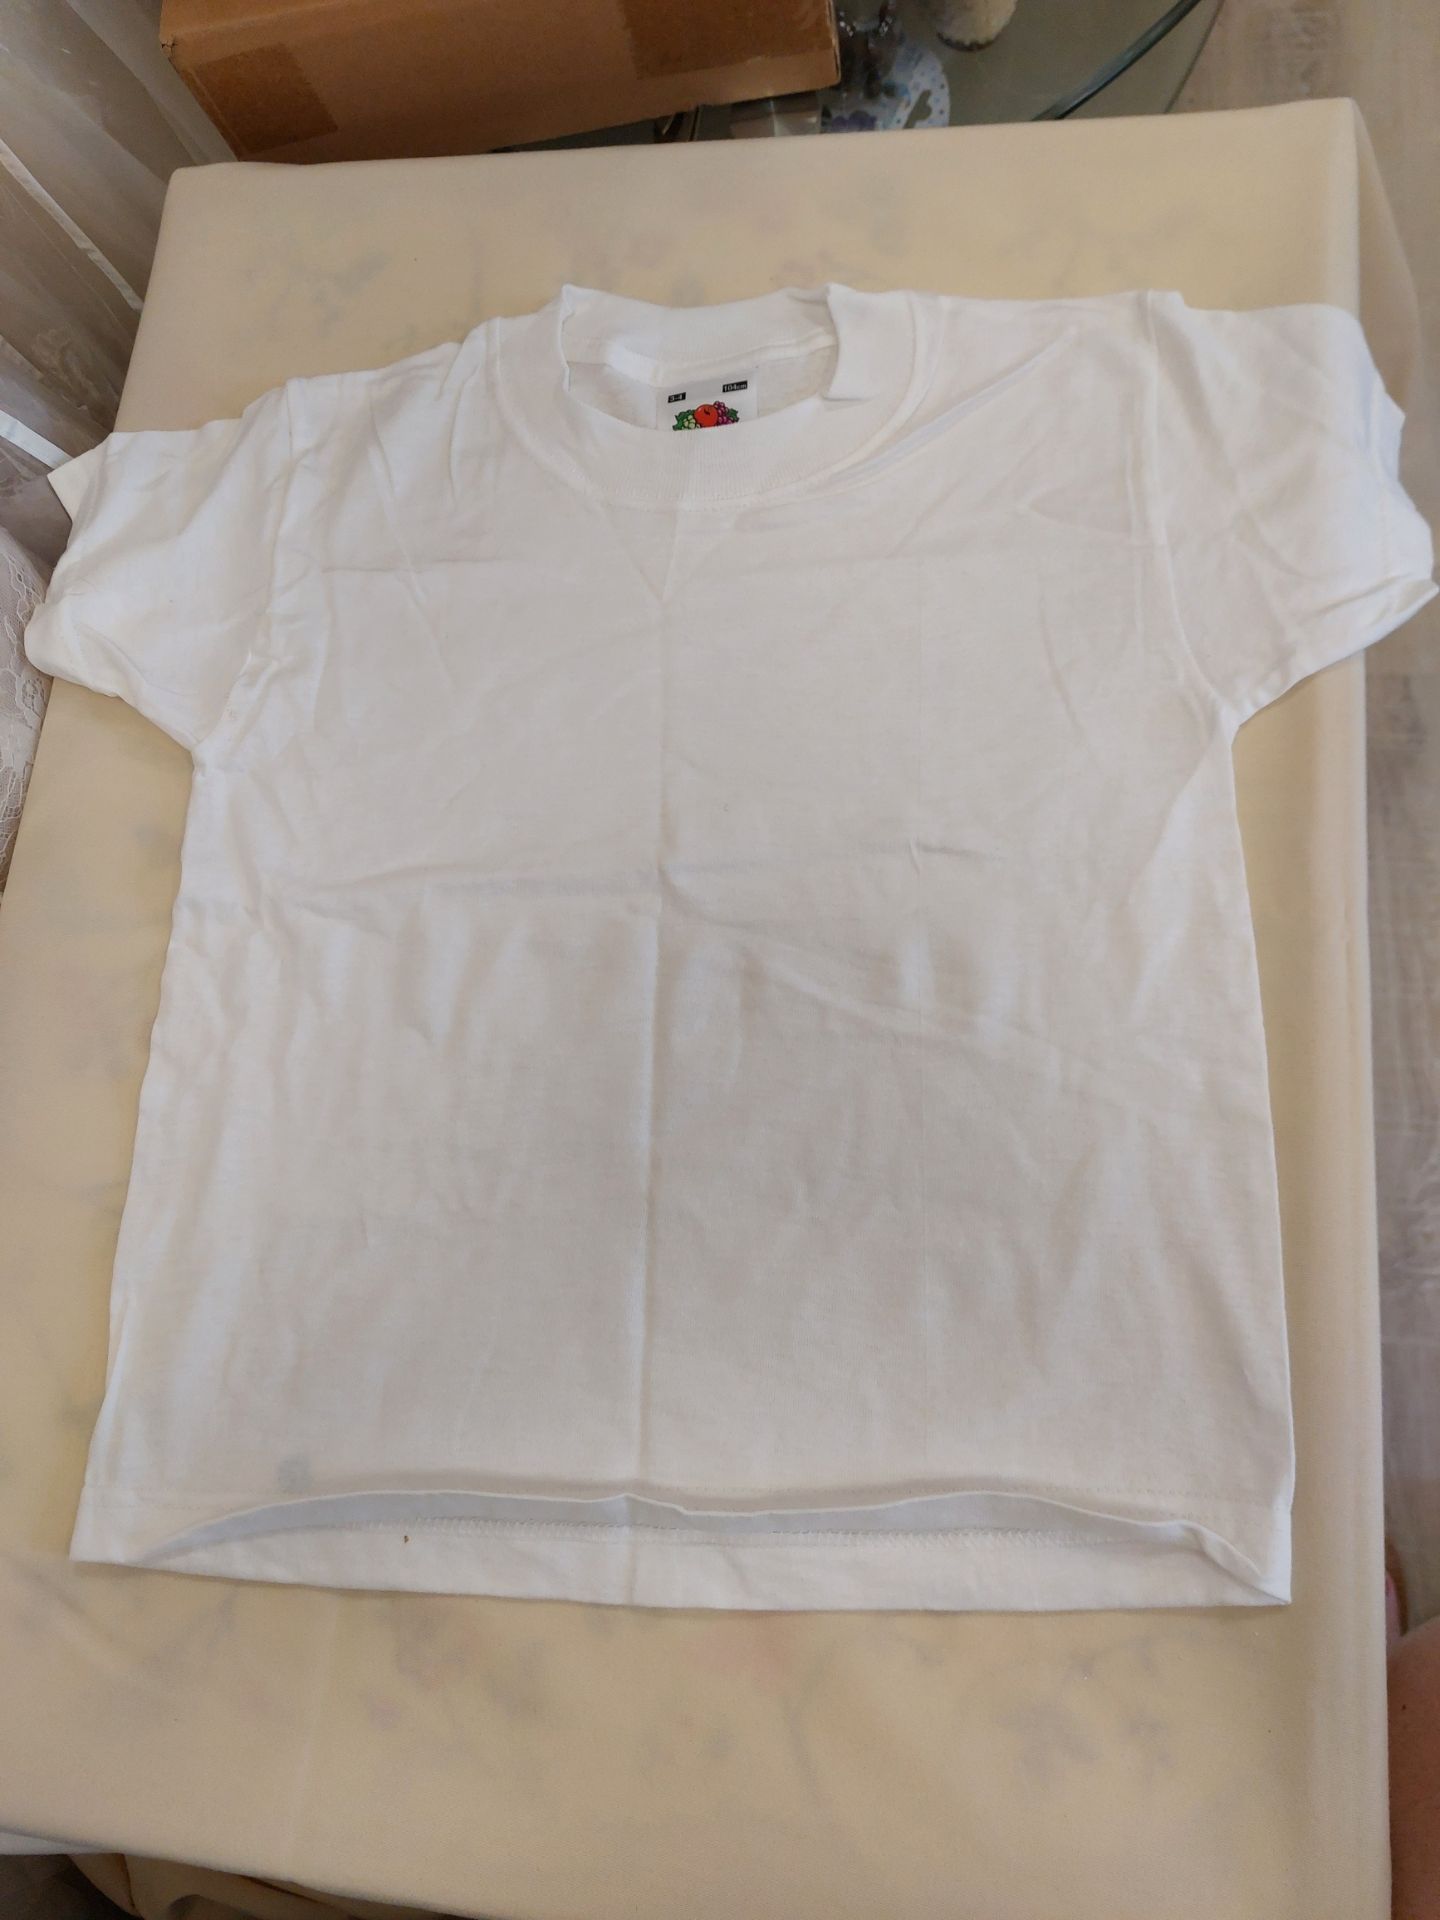 Pack of 6 White Tee-Shirts - Image 6 of 6